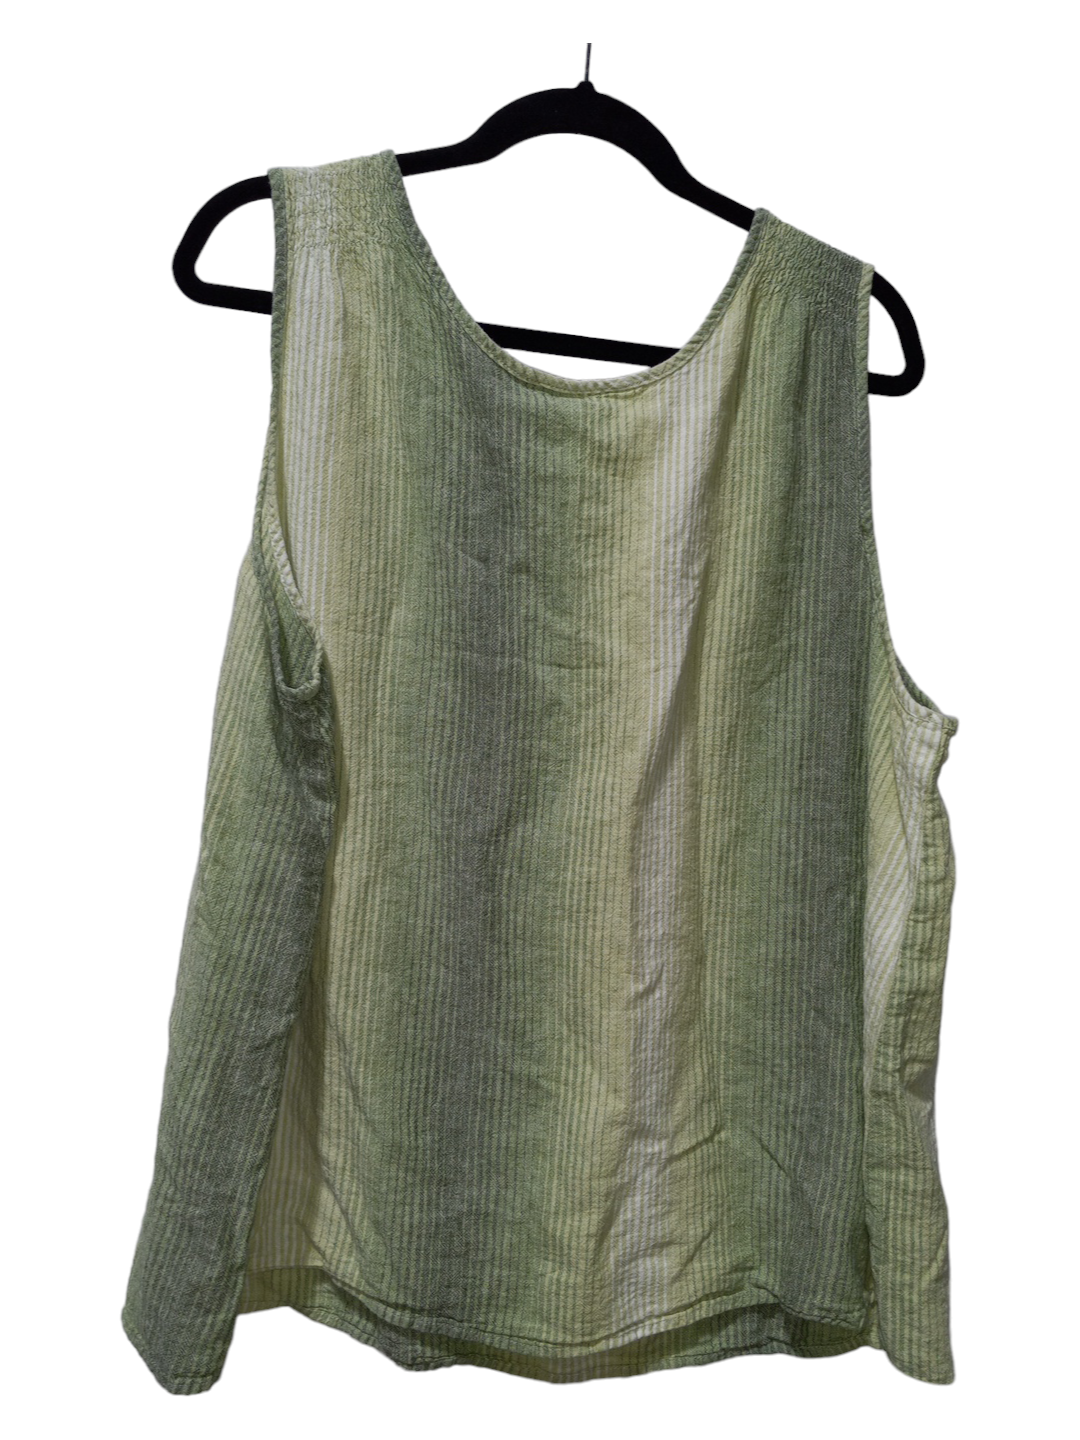 Top Sleeveless By Time And Tru  Size: 3x